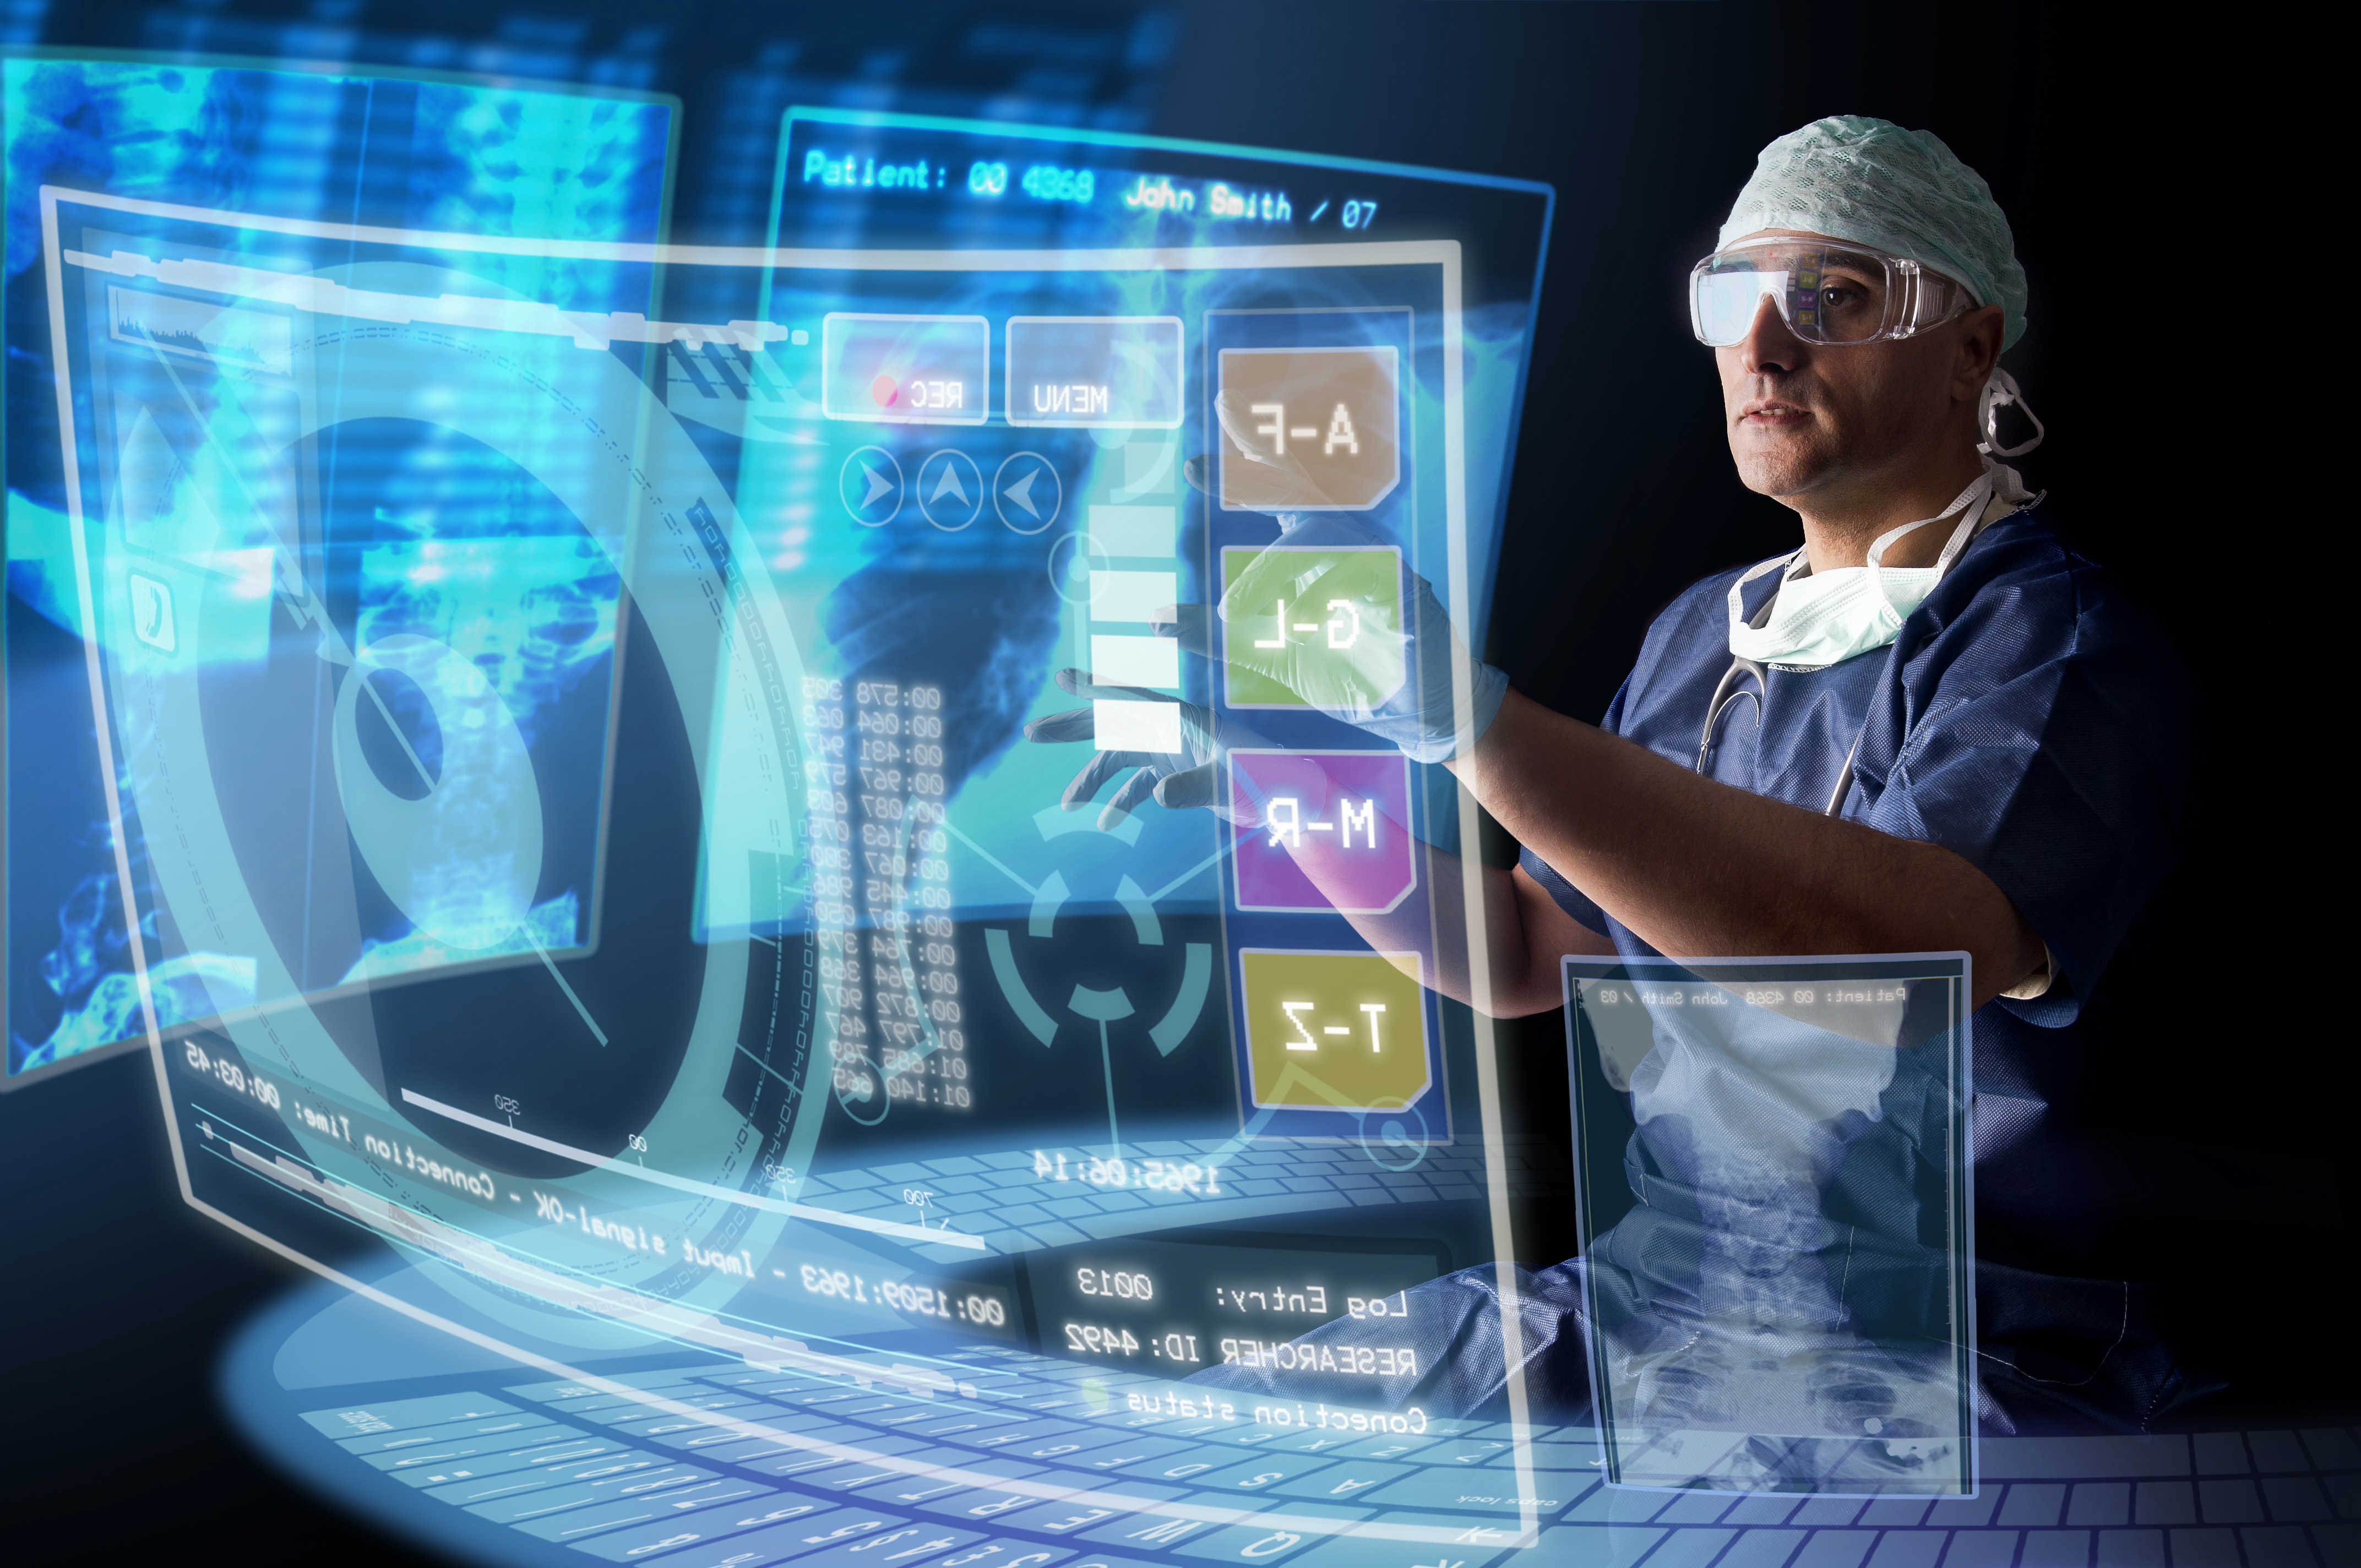 Healthcare Safety And Risk Management Solutions Market